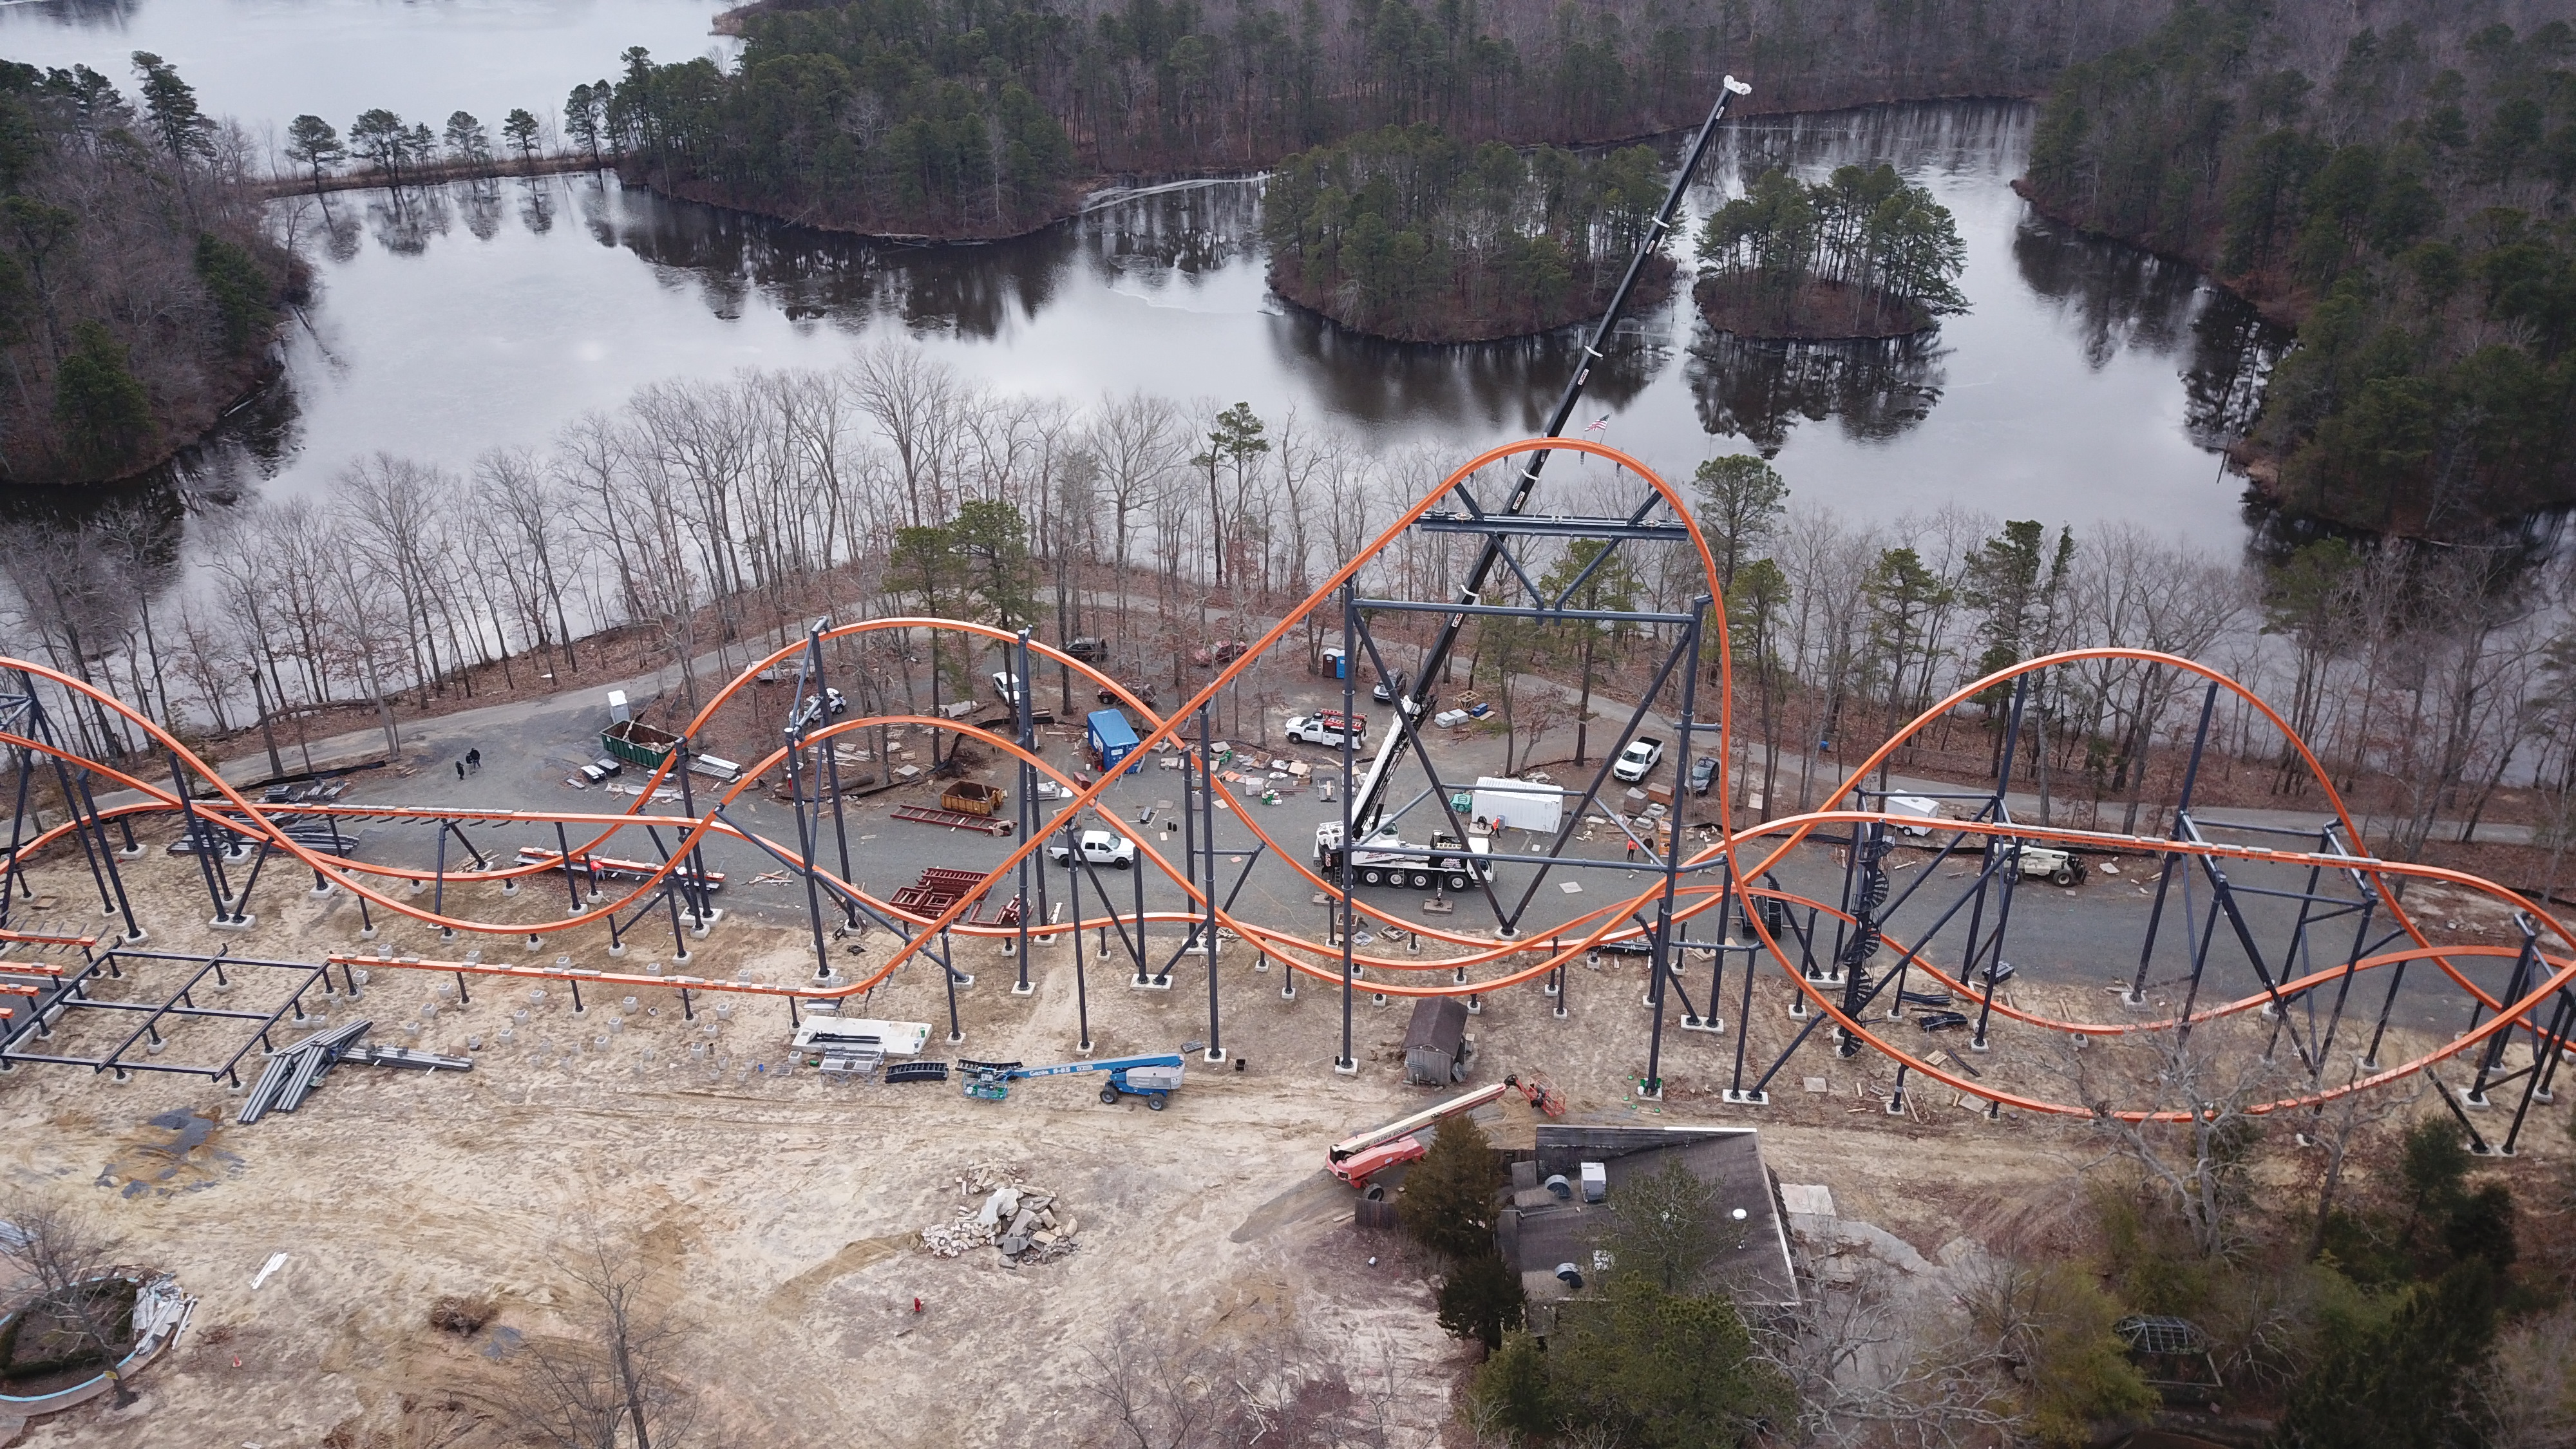 hond Expertise absorptie Jersey Devil Coaster -- World's Tallest, Longest & Fastest Single-Rail  Roller Coaster -- Set To Open At Six Flags Great Adventure - CW Tampa